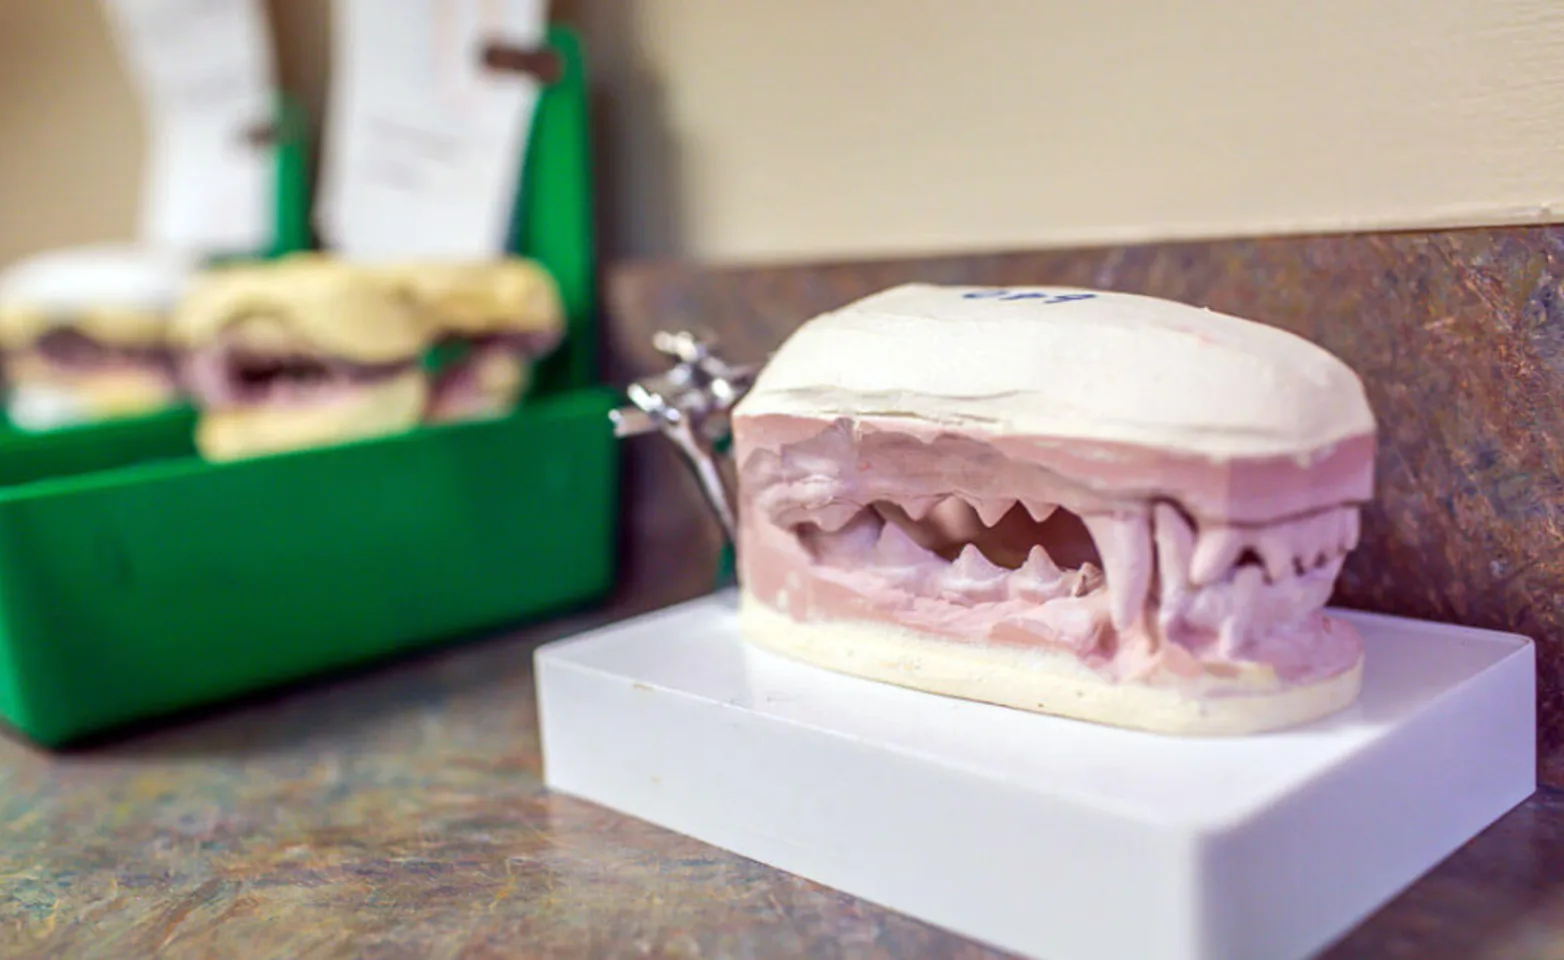 Model of an animal's jaw sitting on a counter